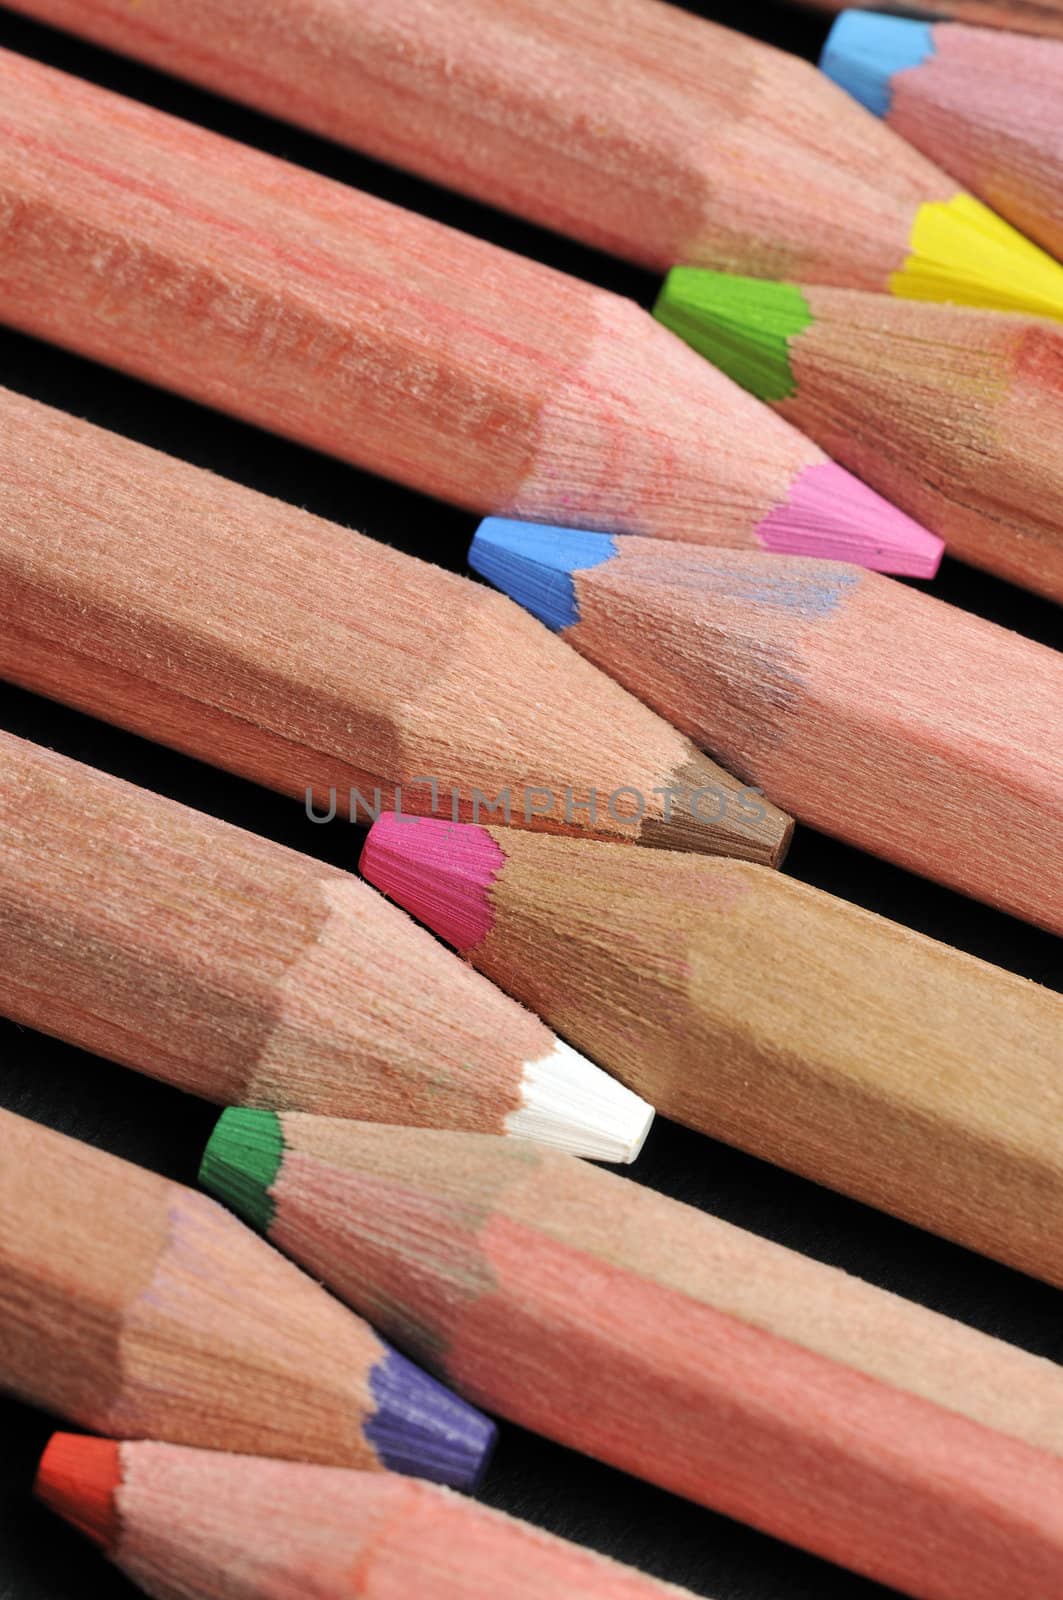 Colored pencils close up against black background